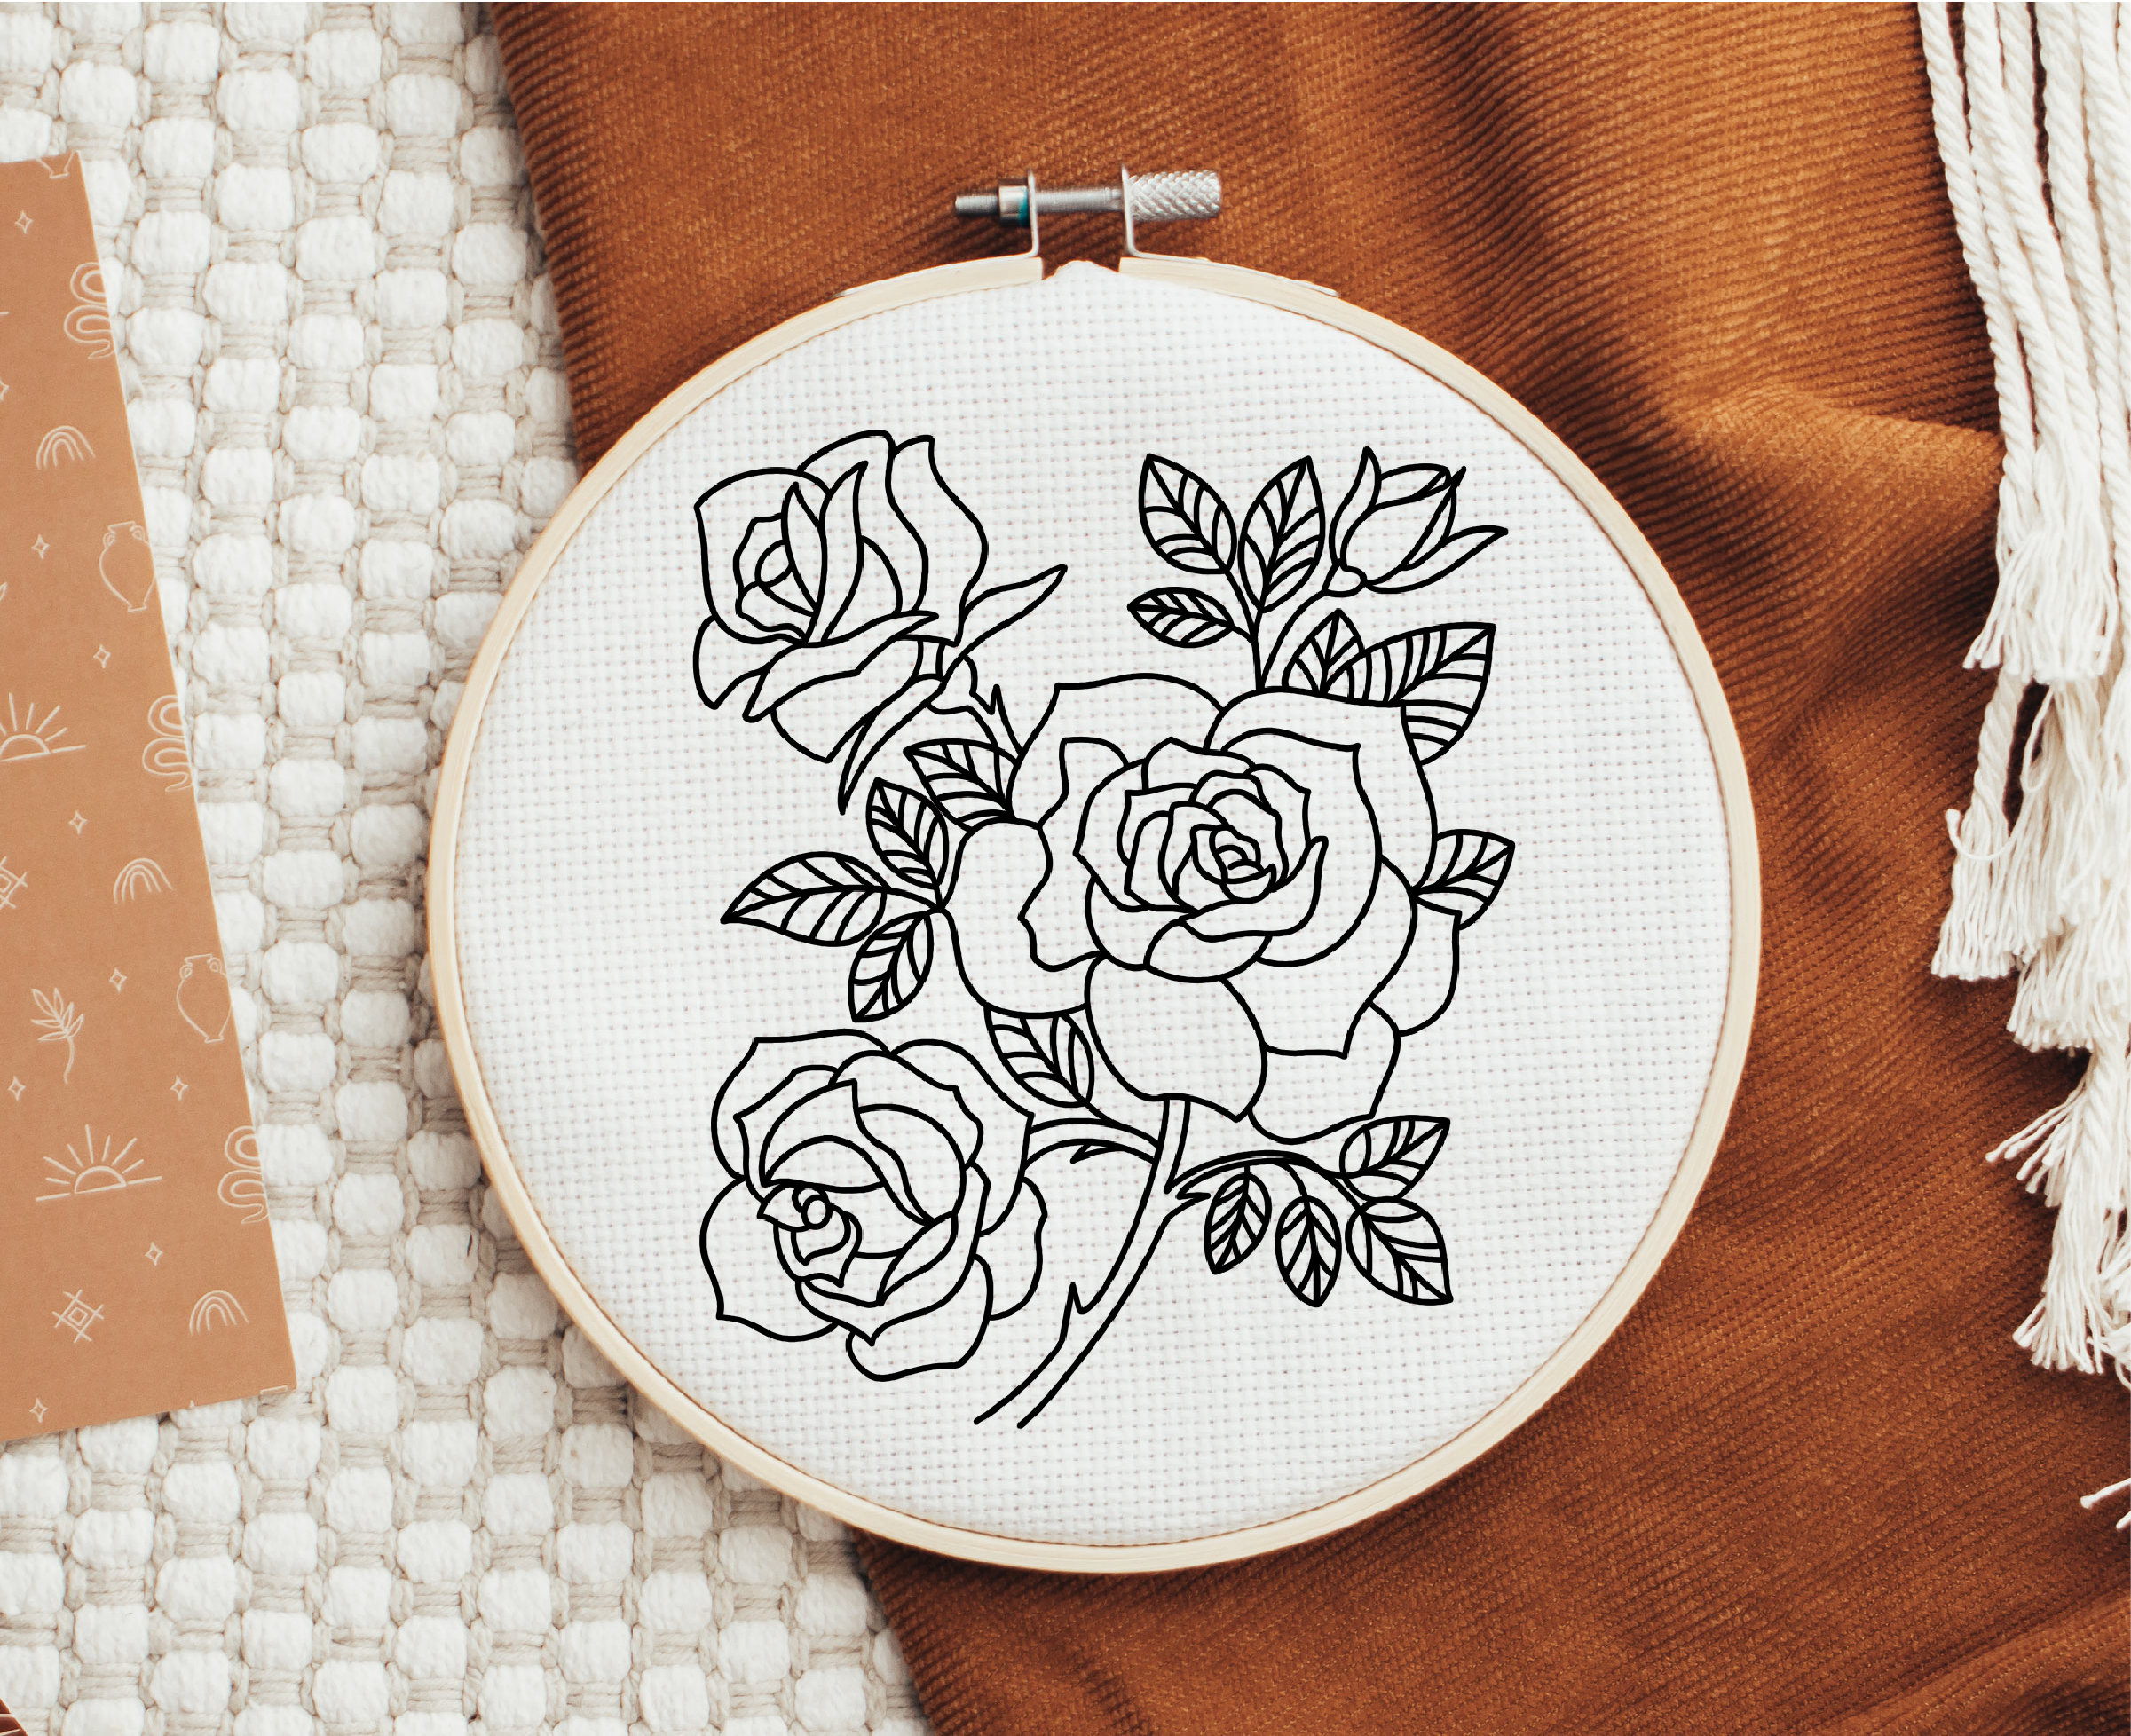 Leisure Arts Embroidery Kit 4 Blush Rose (French) - embroidery kit for  beginners - embroidery kit for adults - cross stitch kits - cross stitch  kits for beginners - embroidery patterns